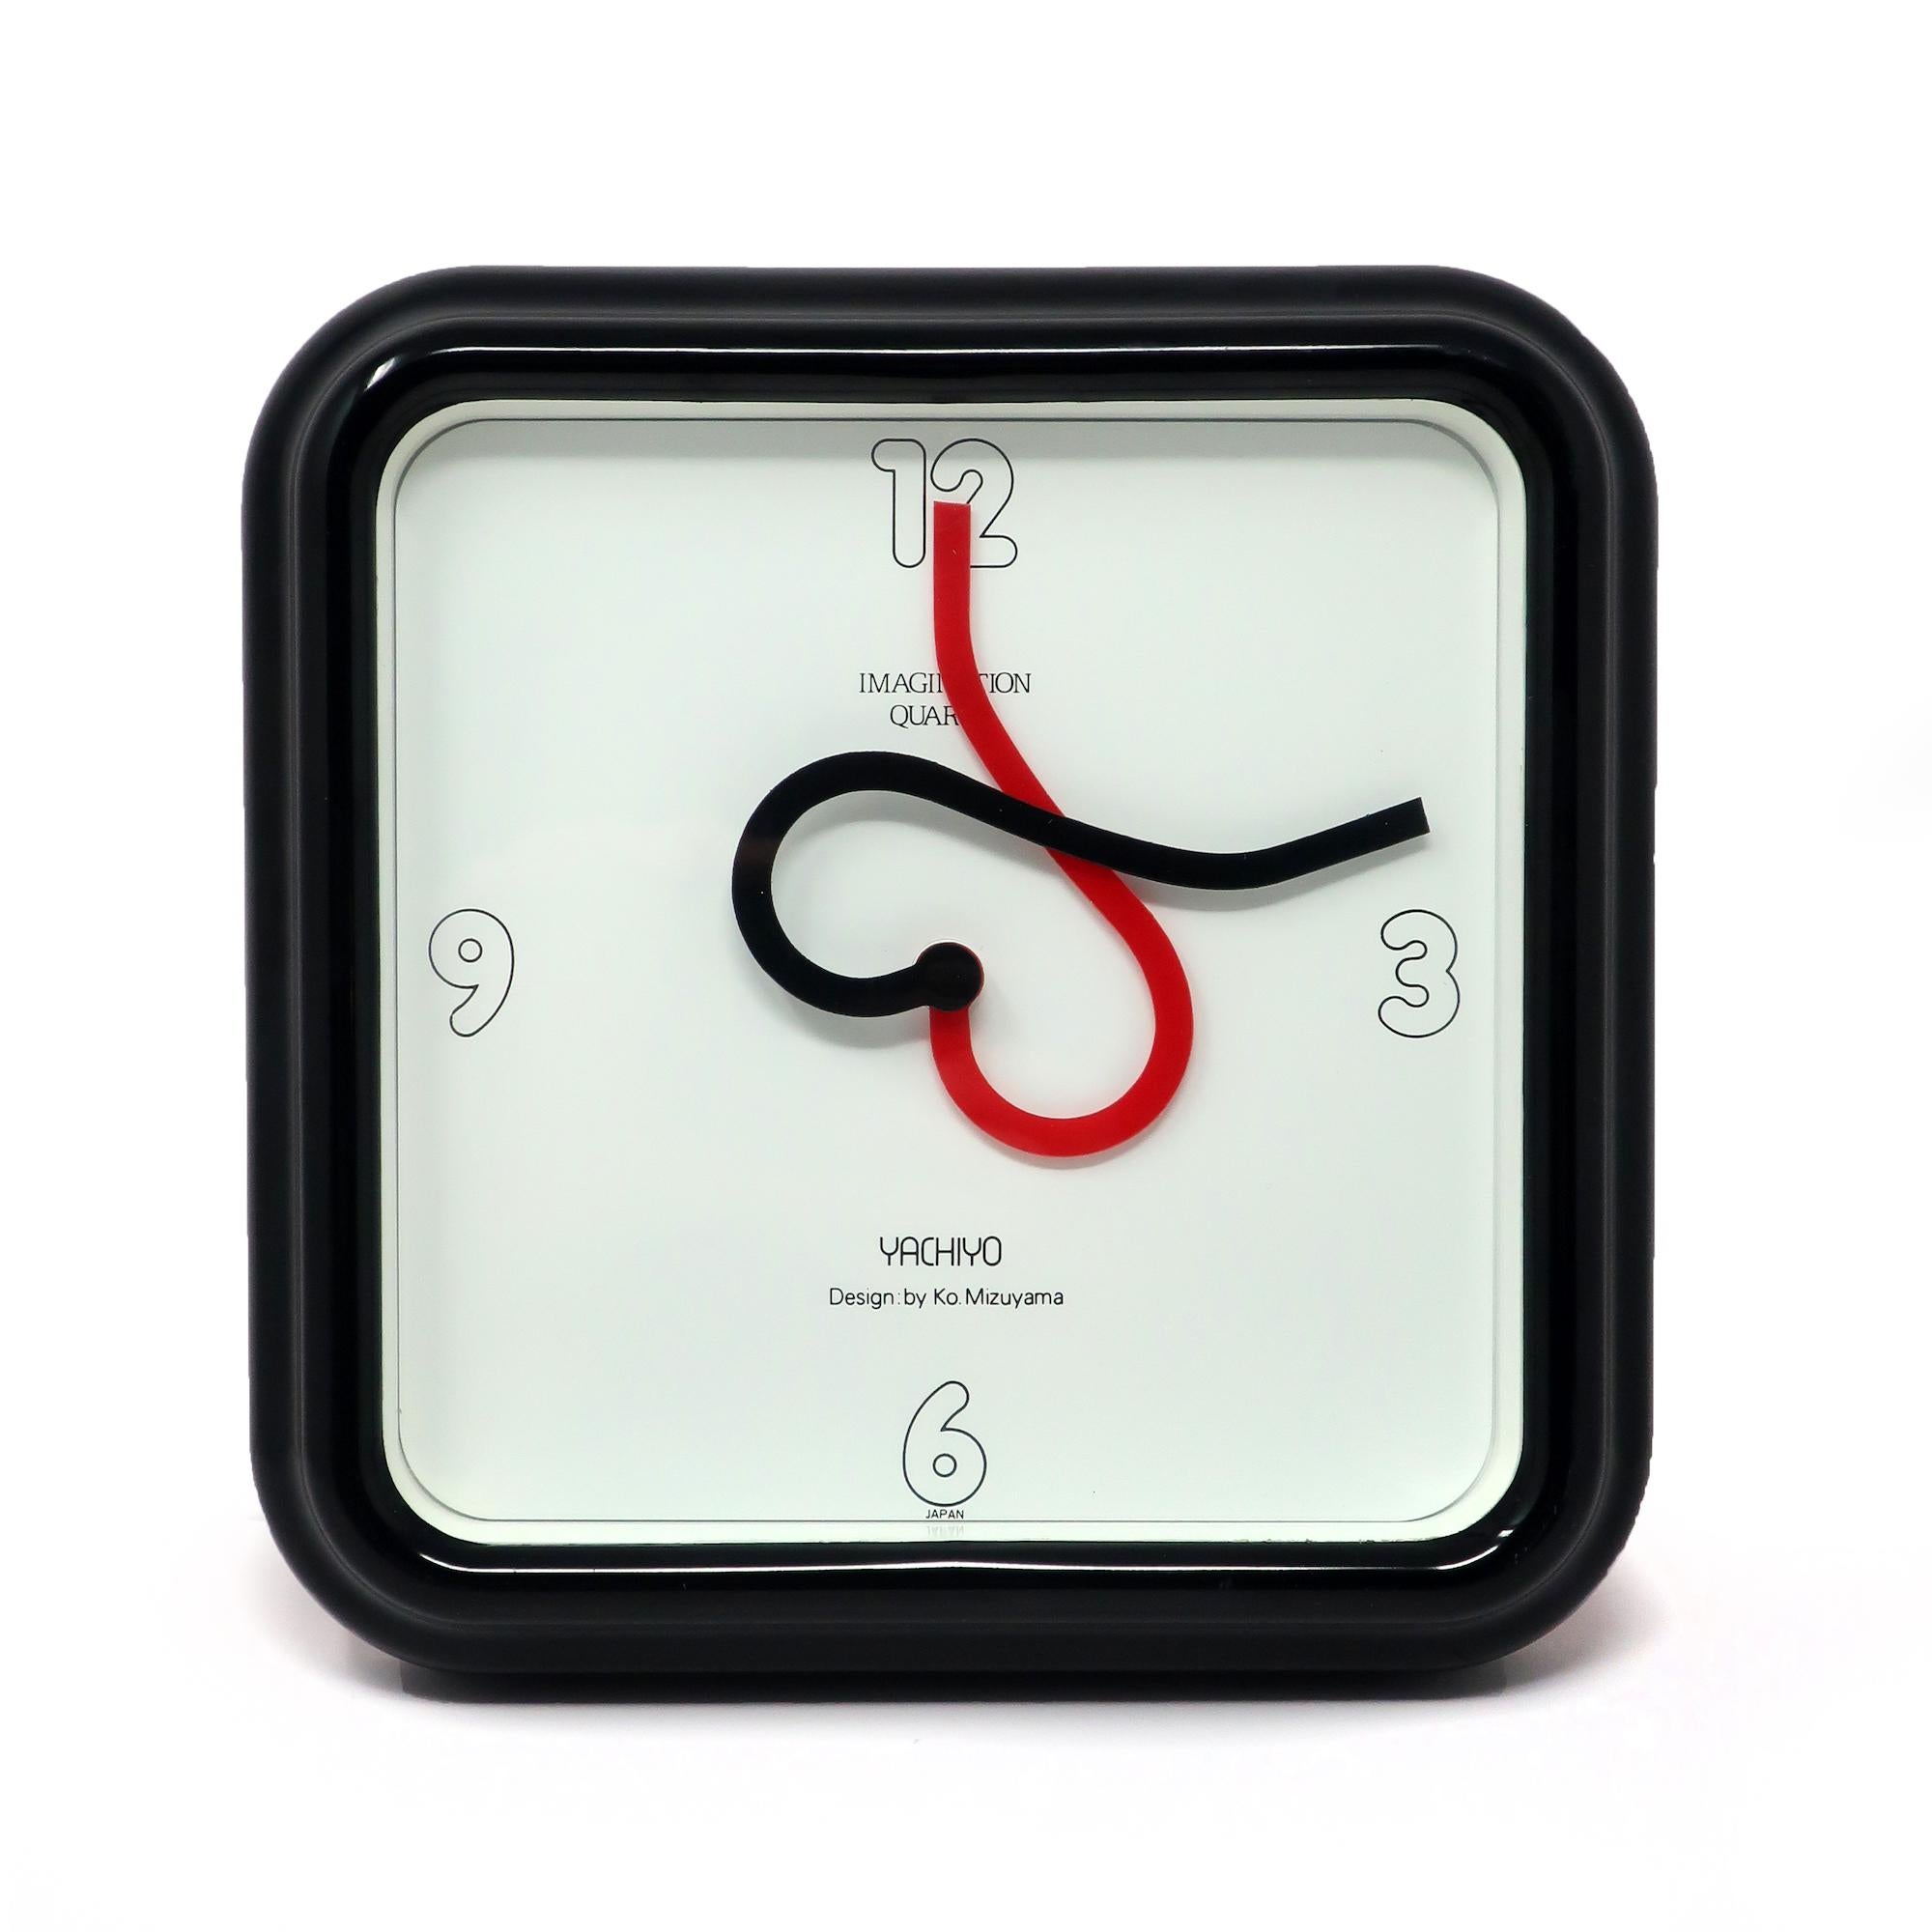 A fantastic wall clock designed by Ko Mizuyama, a prolific Japanese designer of clocks in the 1980s.  It has a black plastic case, white face with black numbers, and red and black hands that form a heart every hour.

In good vintage condition with